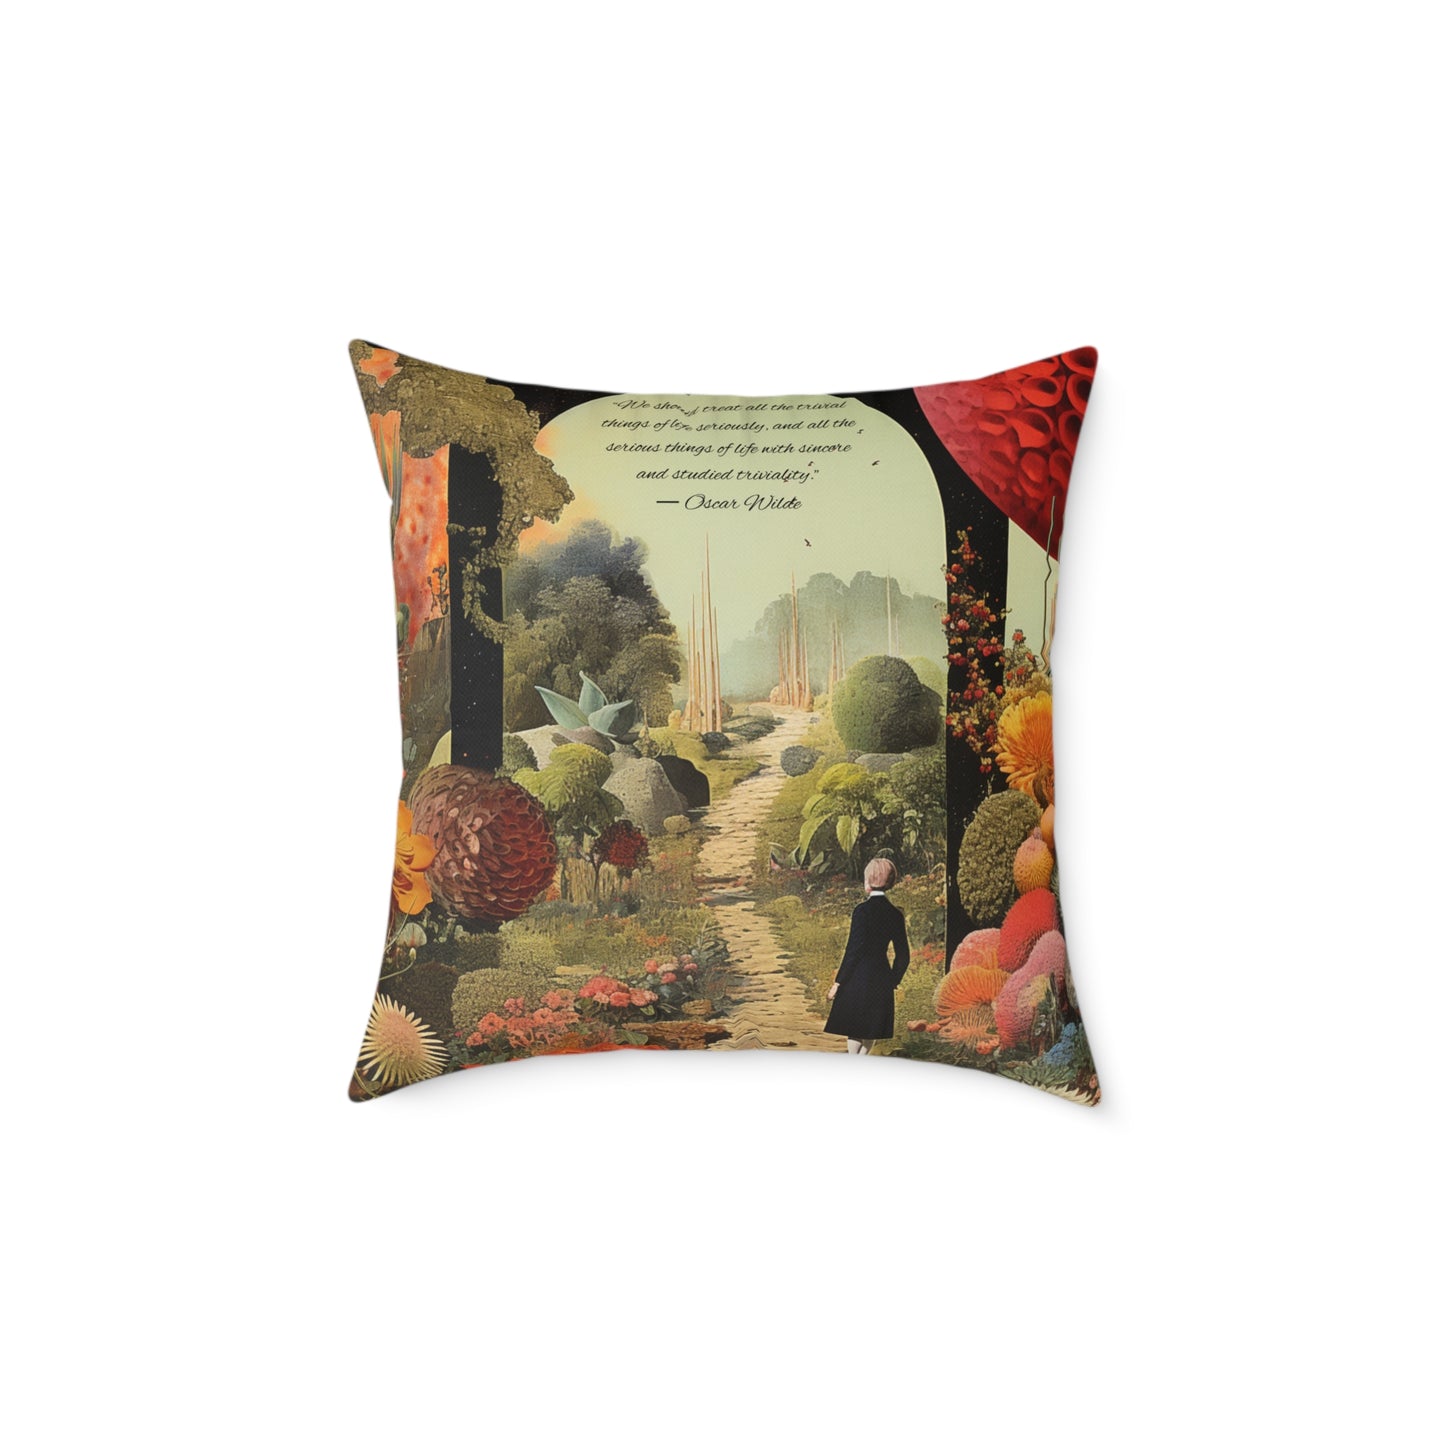 Oscar Wilde "Trivial things" Quote, Luxury Cushion